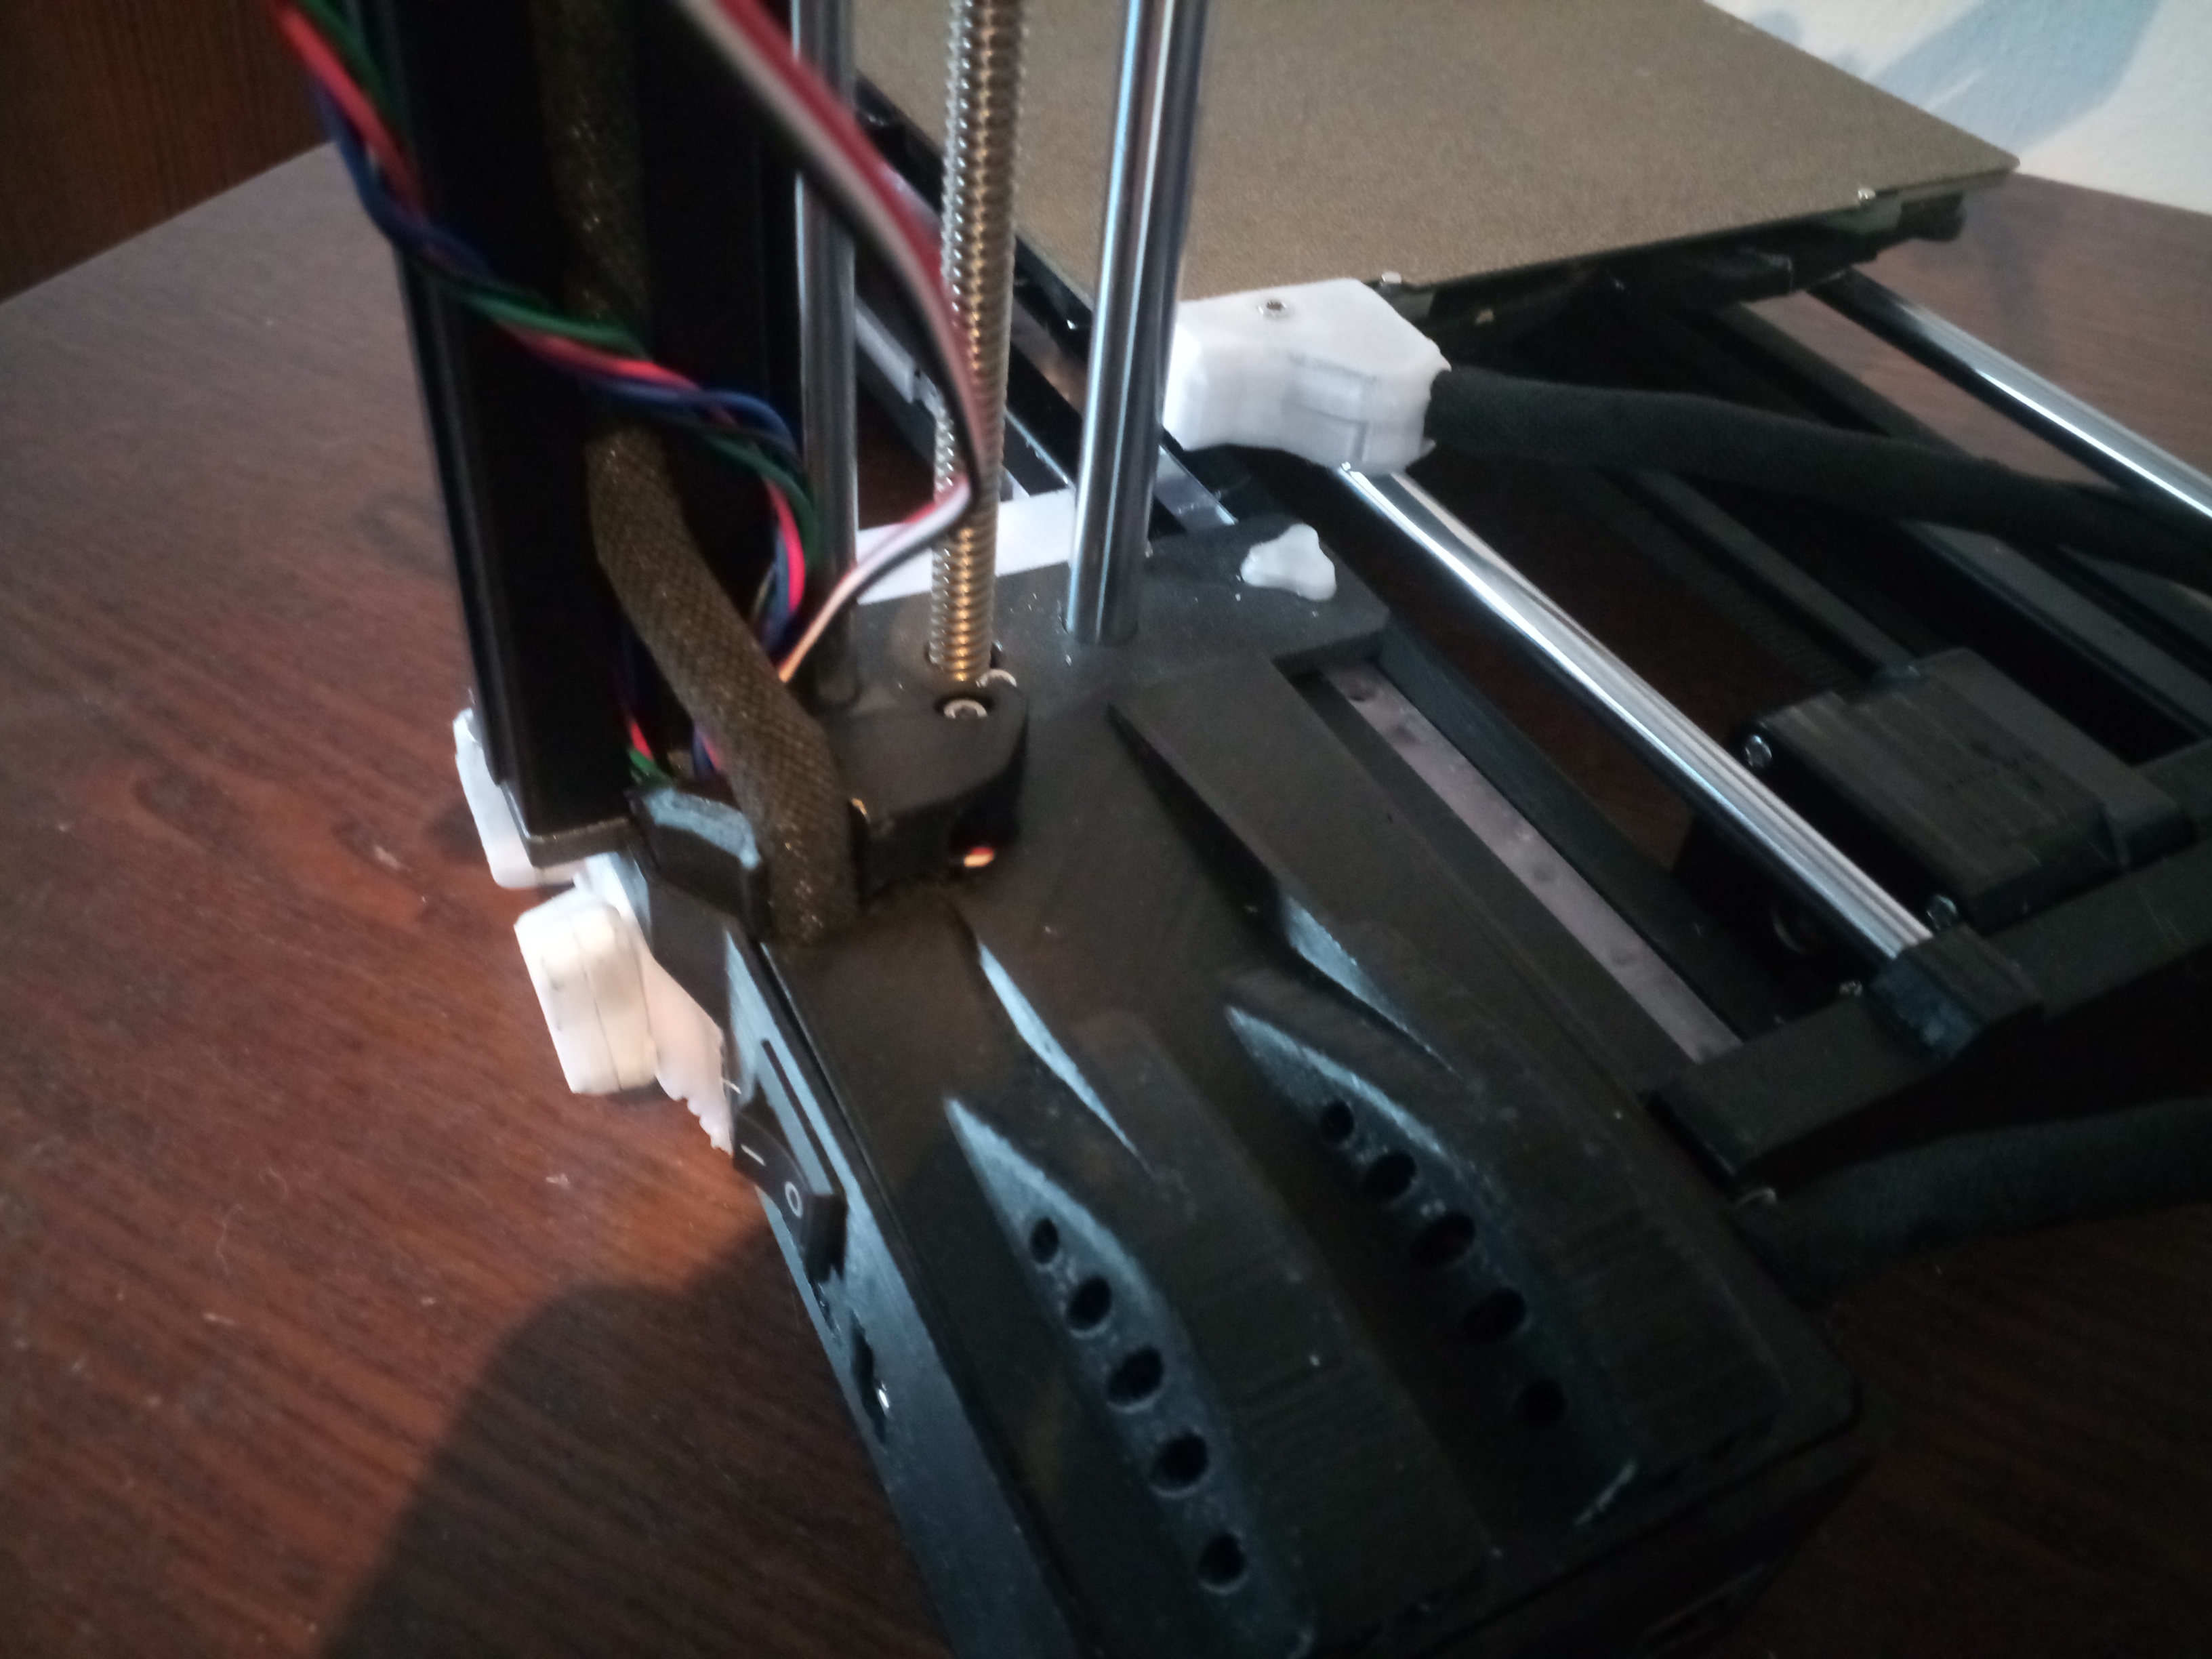 Prusa Mini Low Profile Heatbed Cover with 55° angle make M3 screw for z-axis more accessible